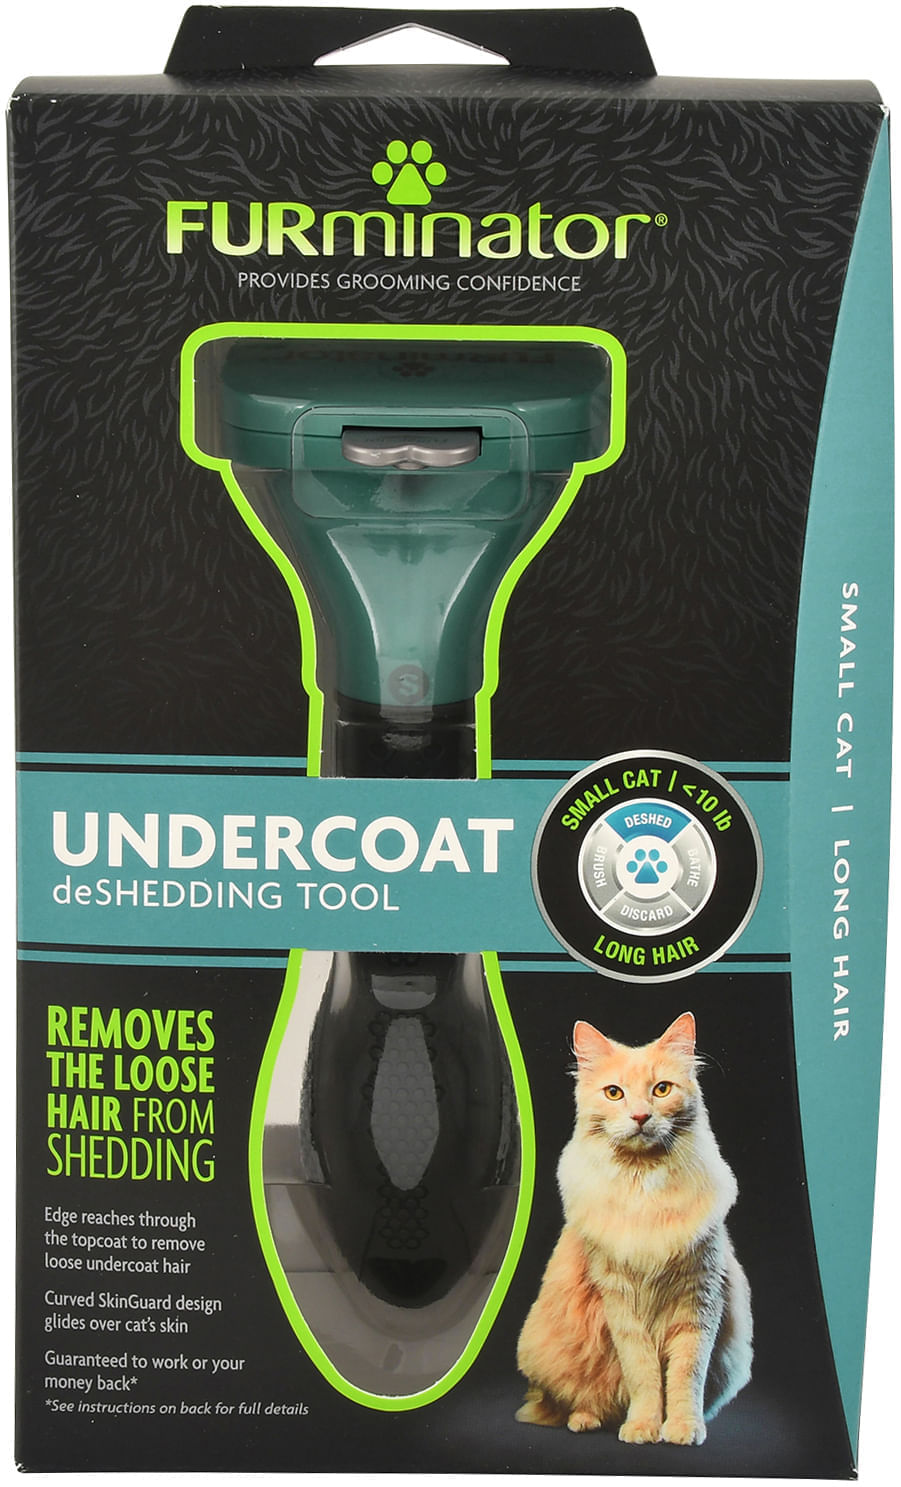 FURminator Undercoat deShedding Tool for Cats of all sizes - Jeffers